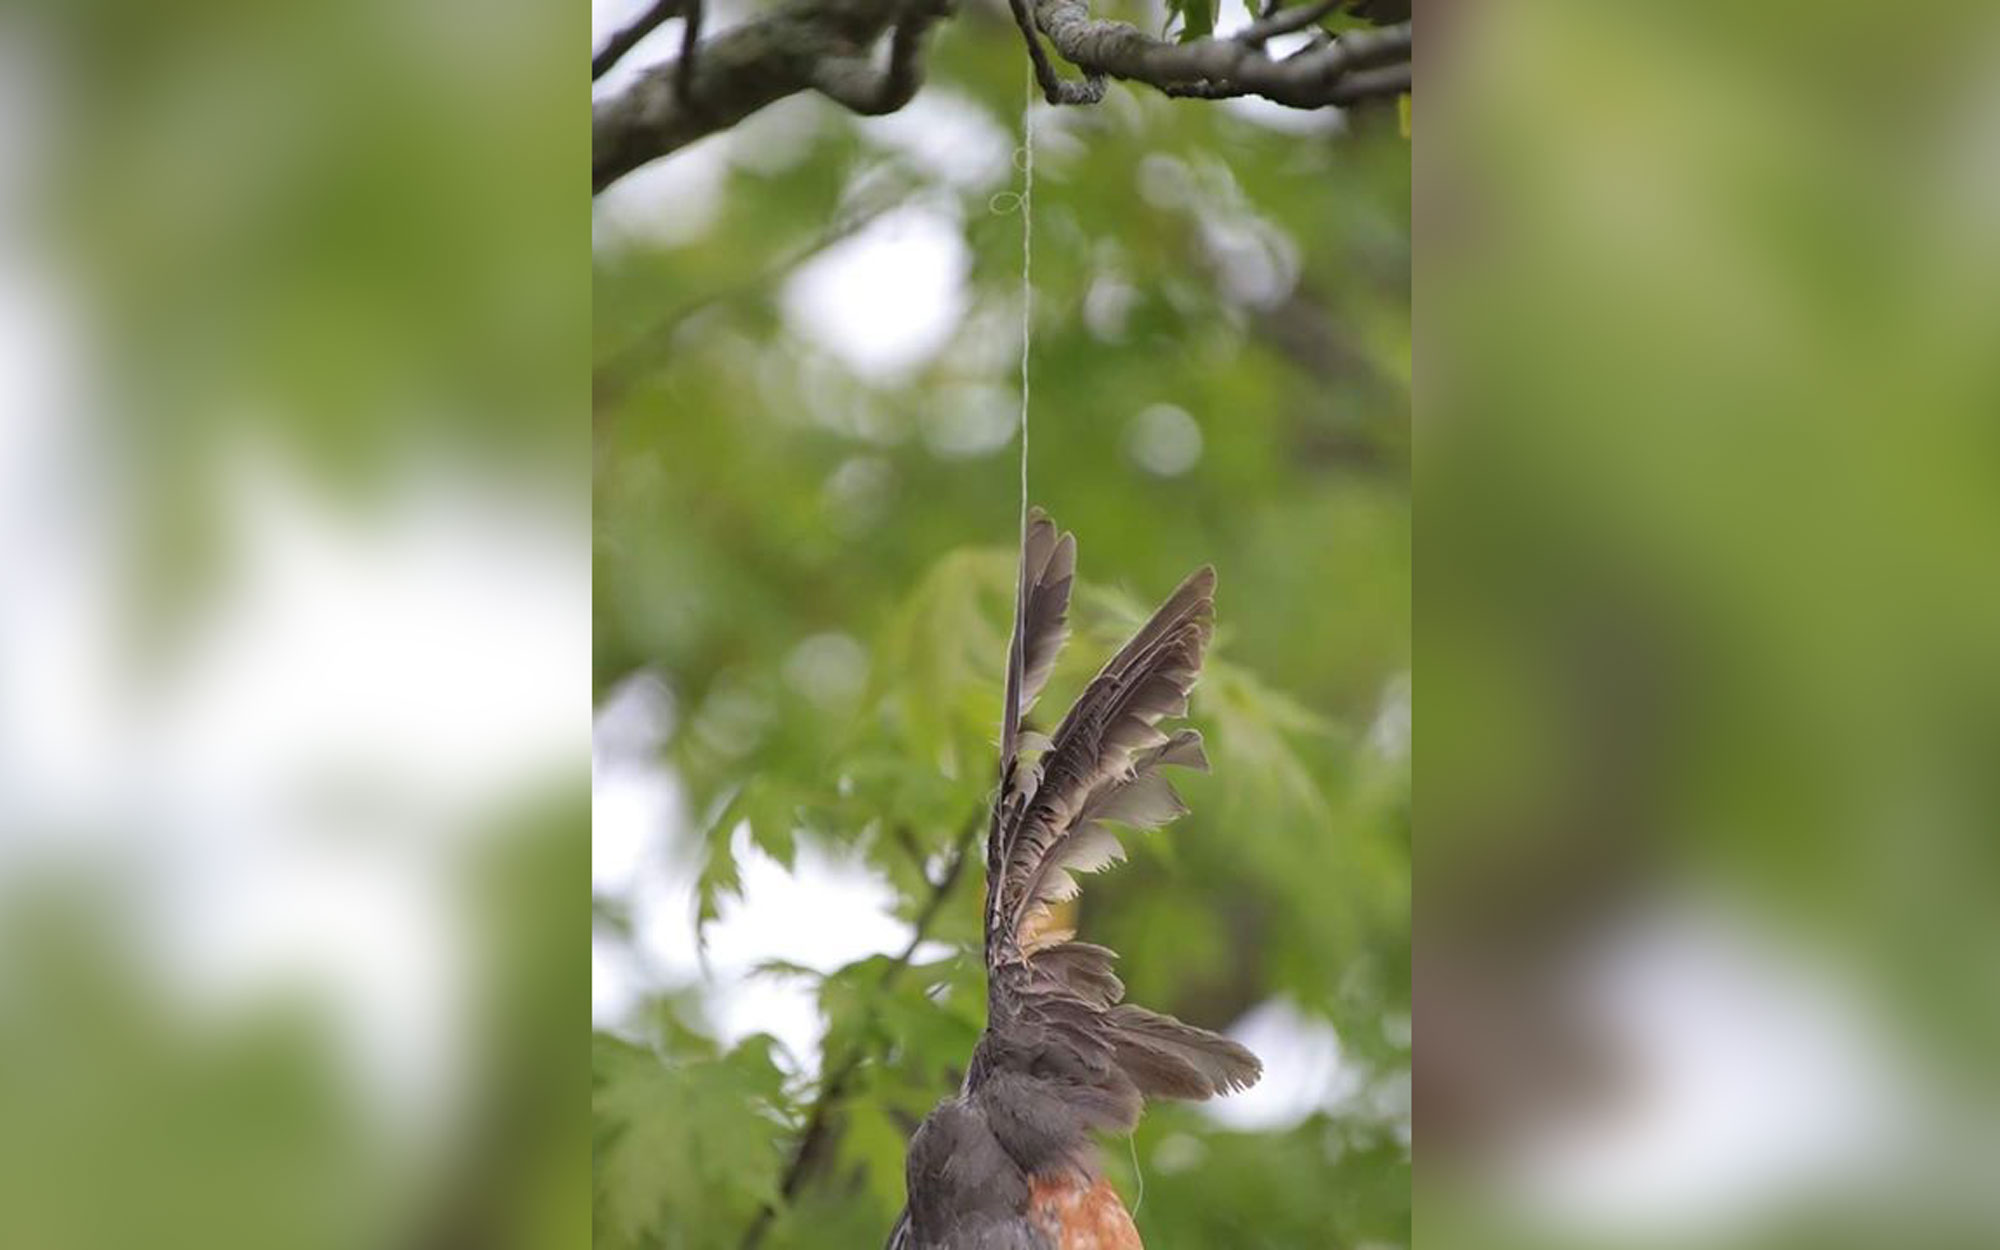 Dead robin hanging from fishing line